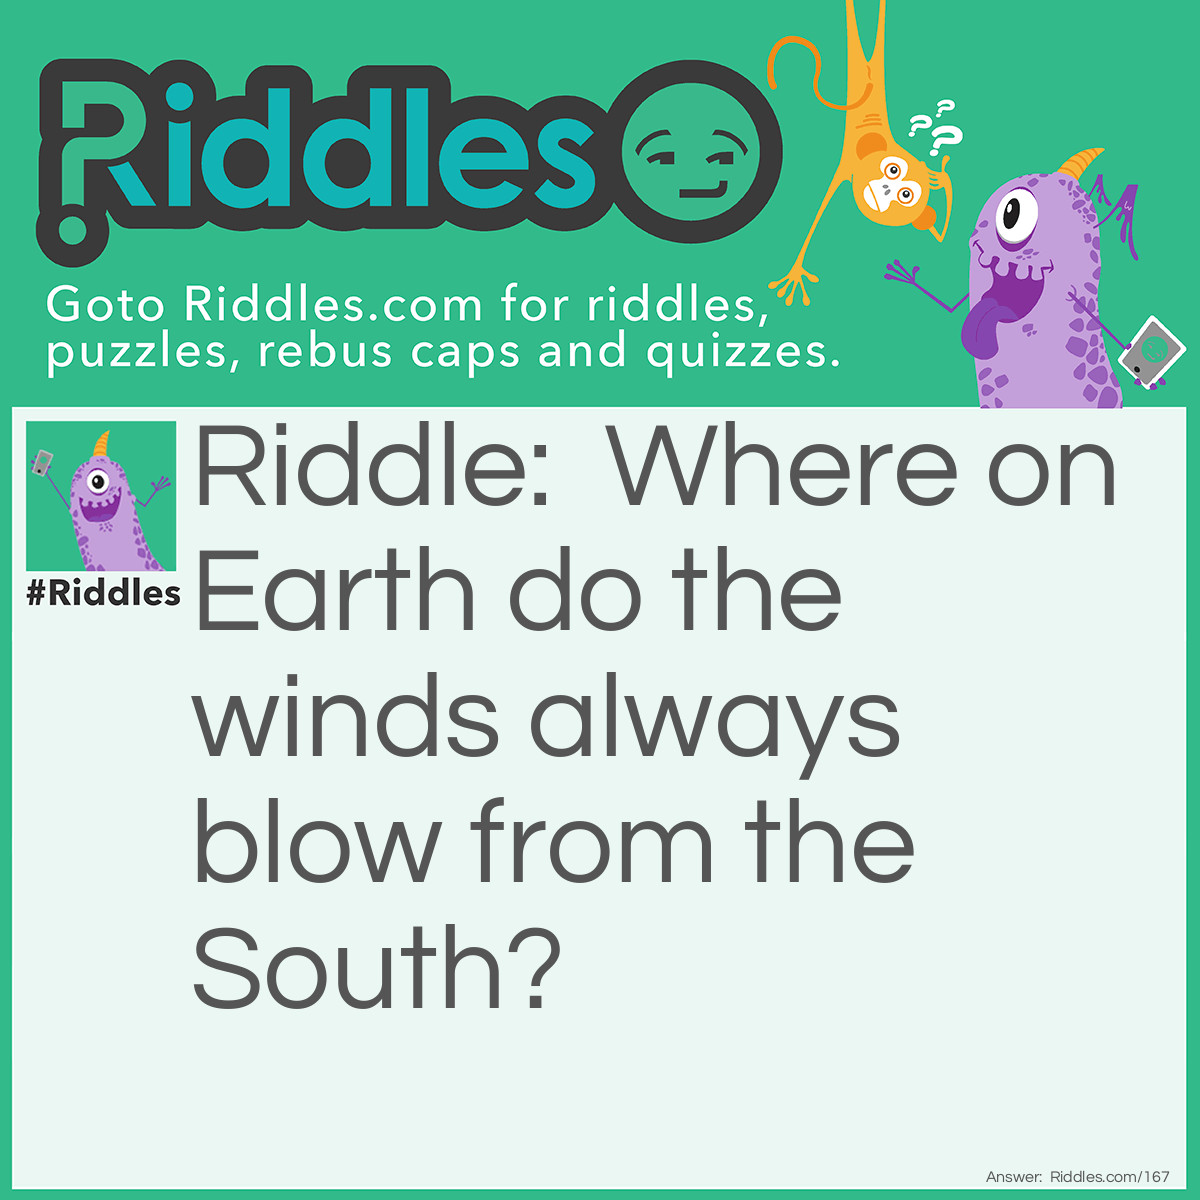 Riddle: Where on Earth do the winds always blow from the South? Answer: The North Pole.